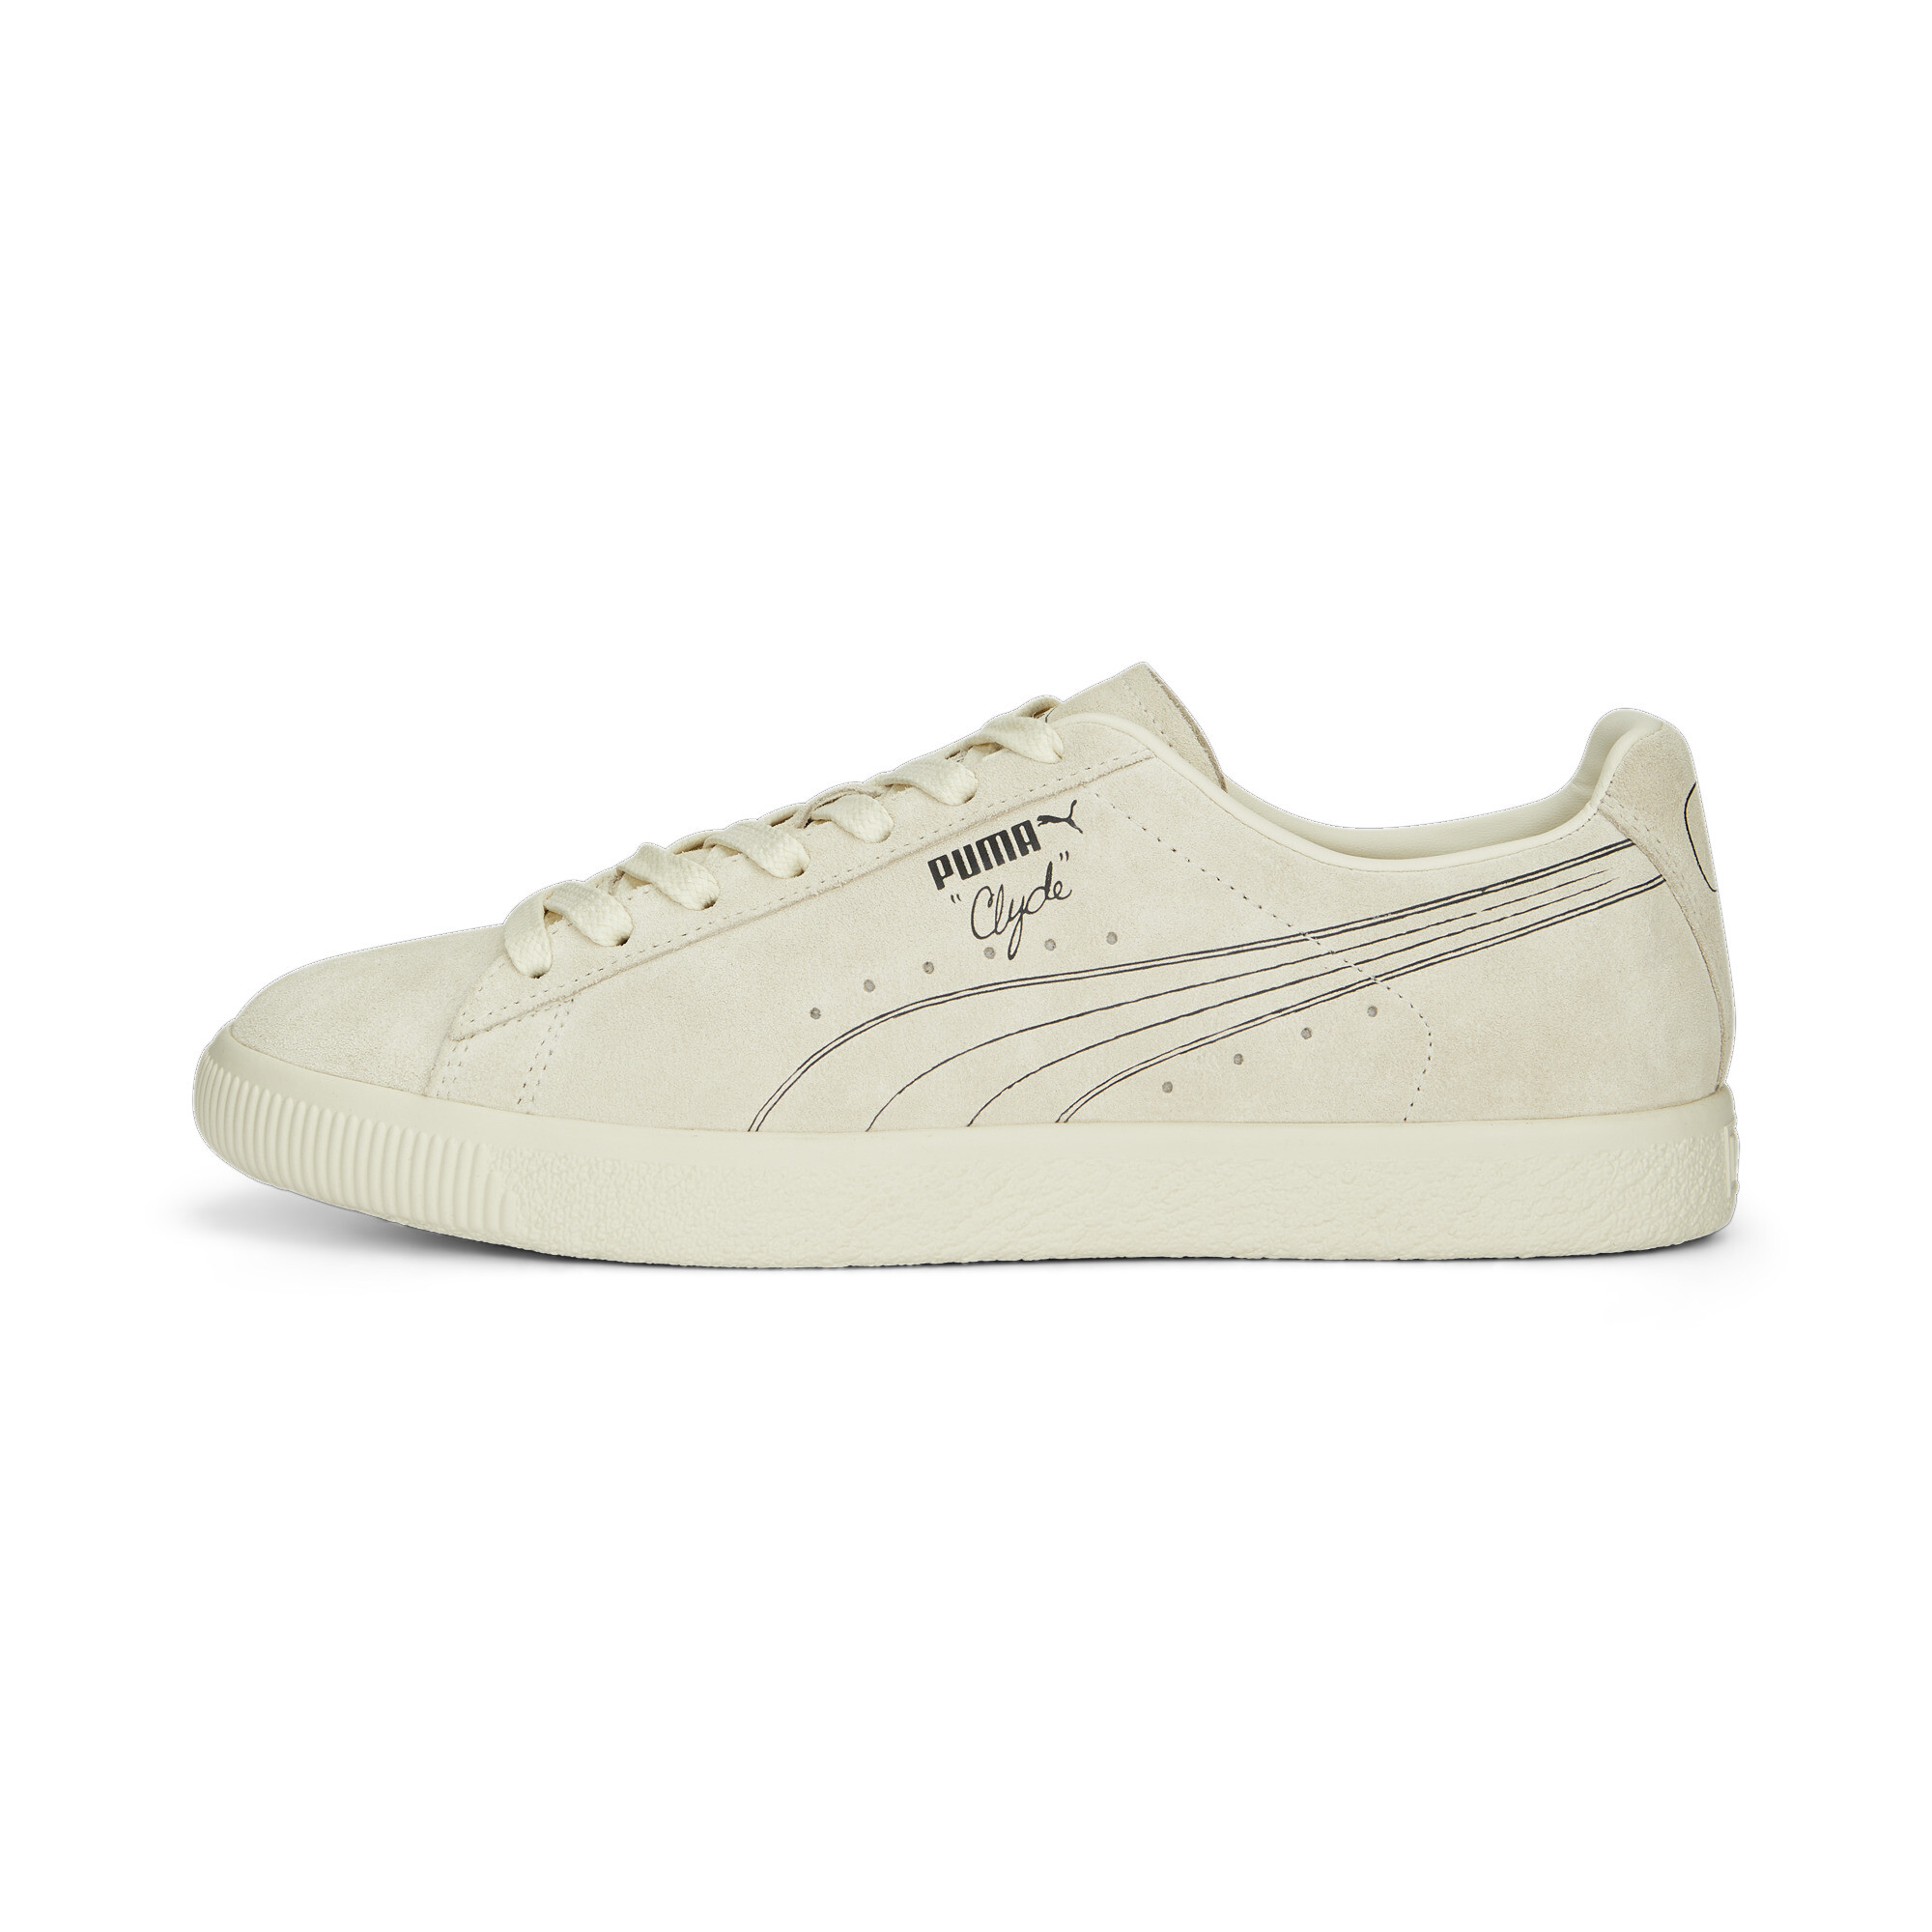 Puma Clyde No.1 Sneakers, White, Size 45, Shoes